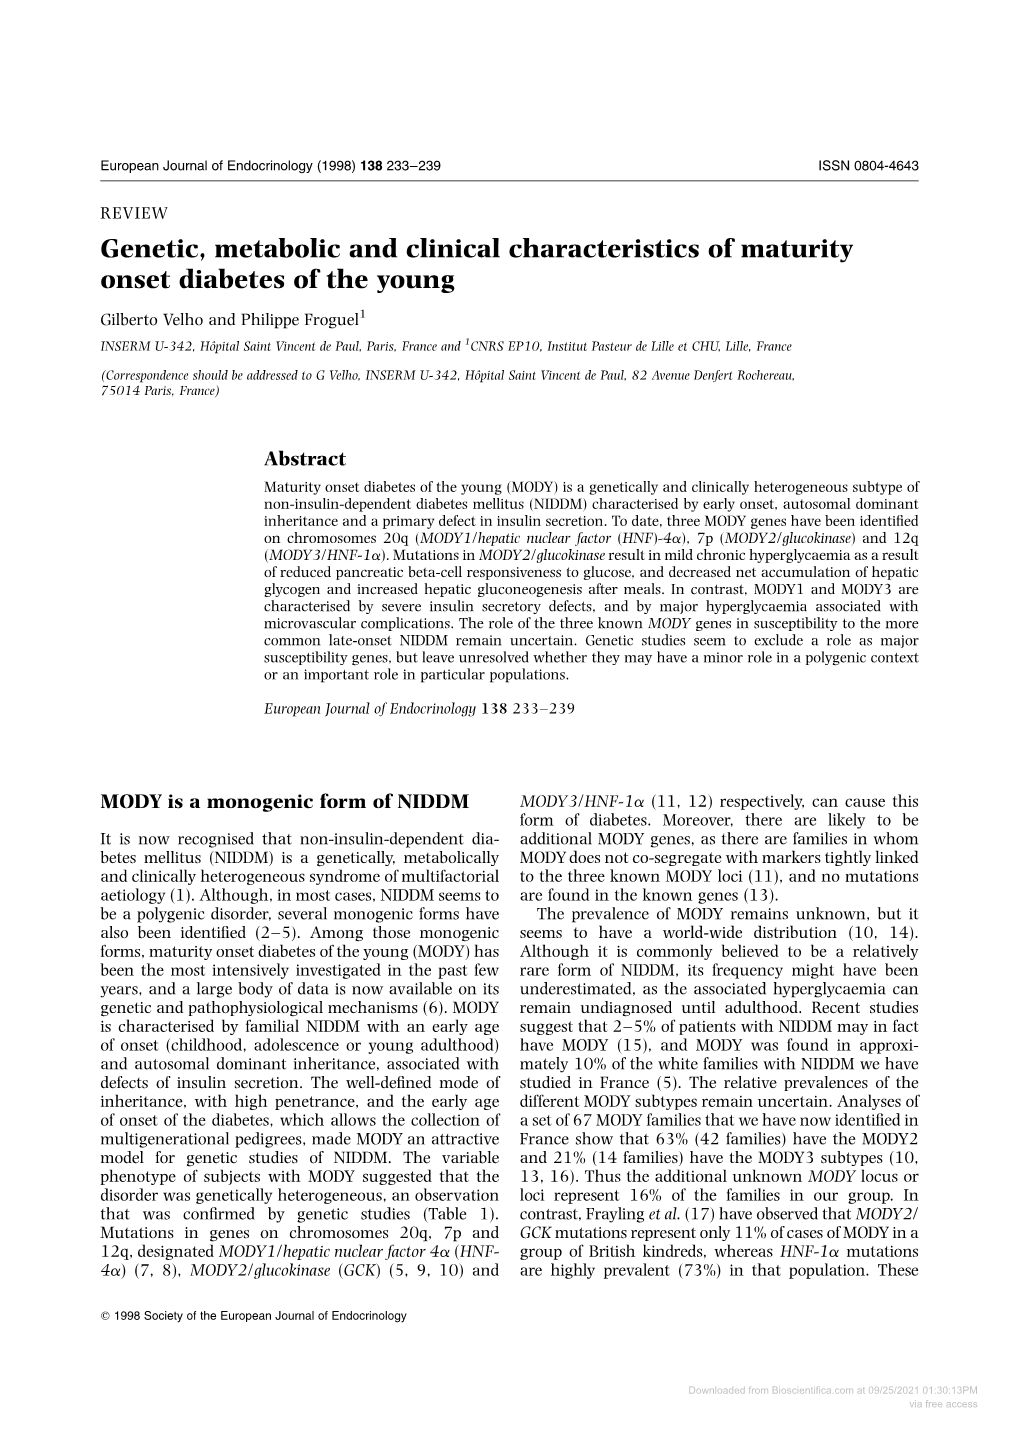 Genetic, Metabolic and Clinical Characteristics of Maturity Onset Diabetes of the Young